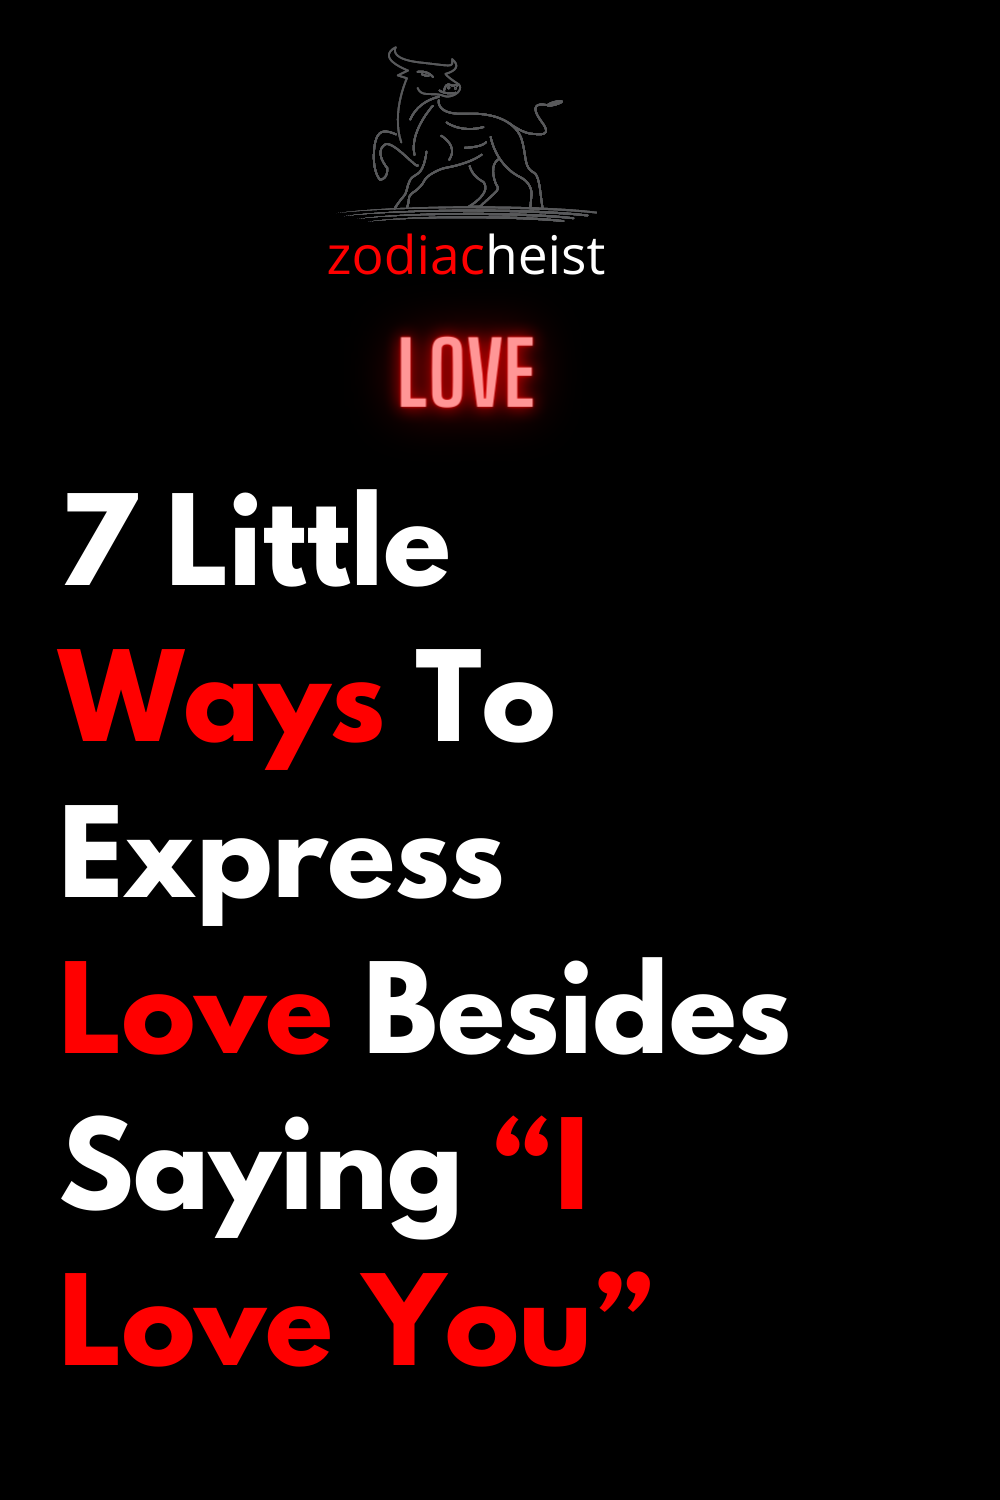 7 Little Ways To Express Love Besides Saying “I Love You”